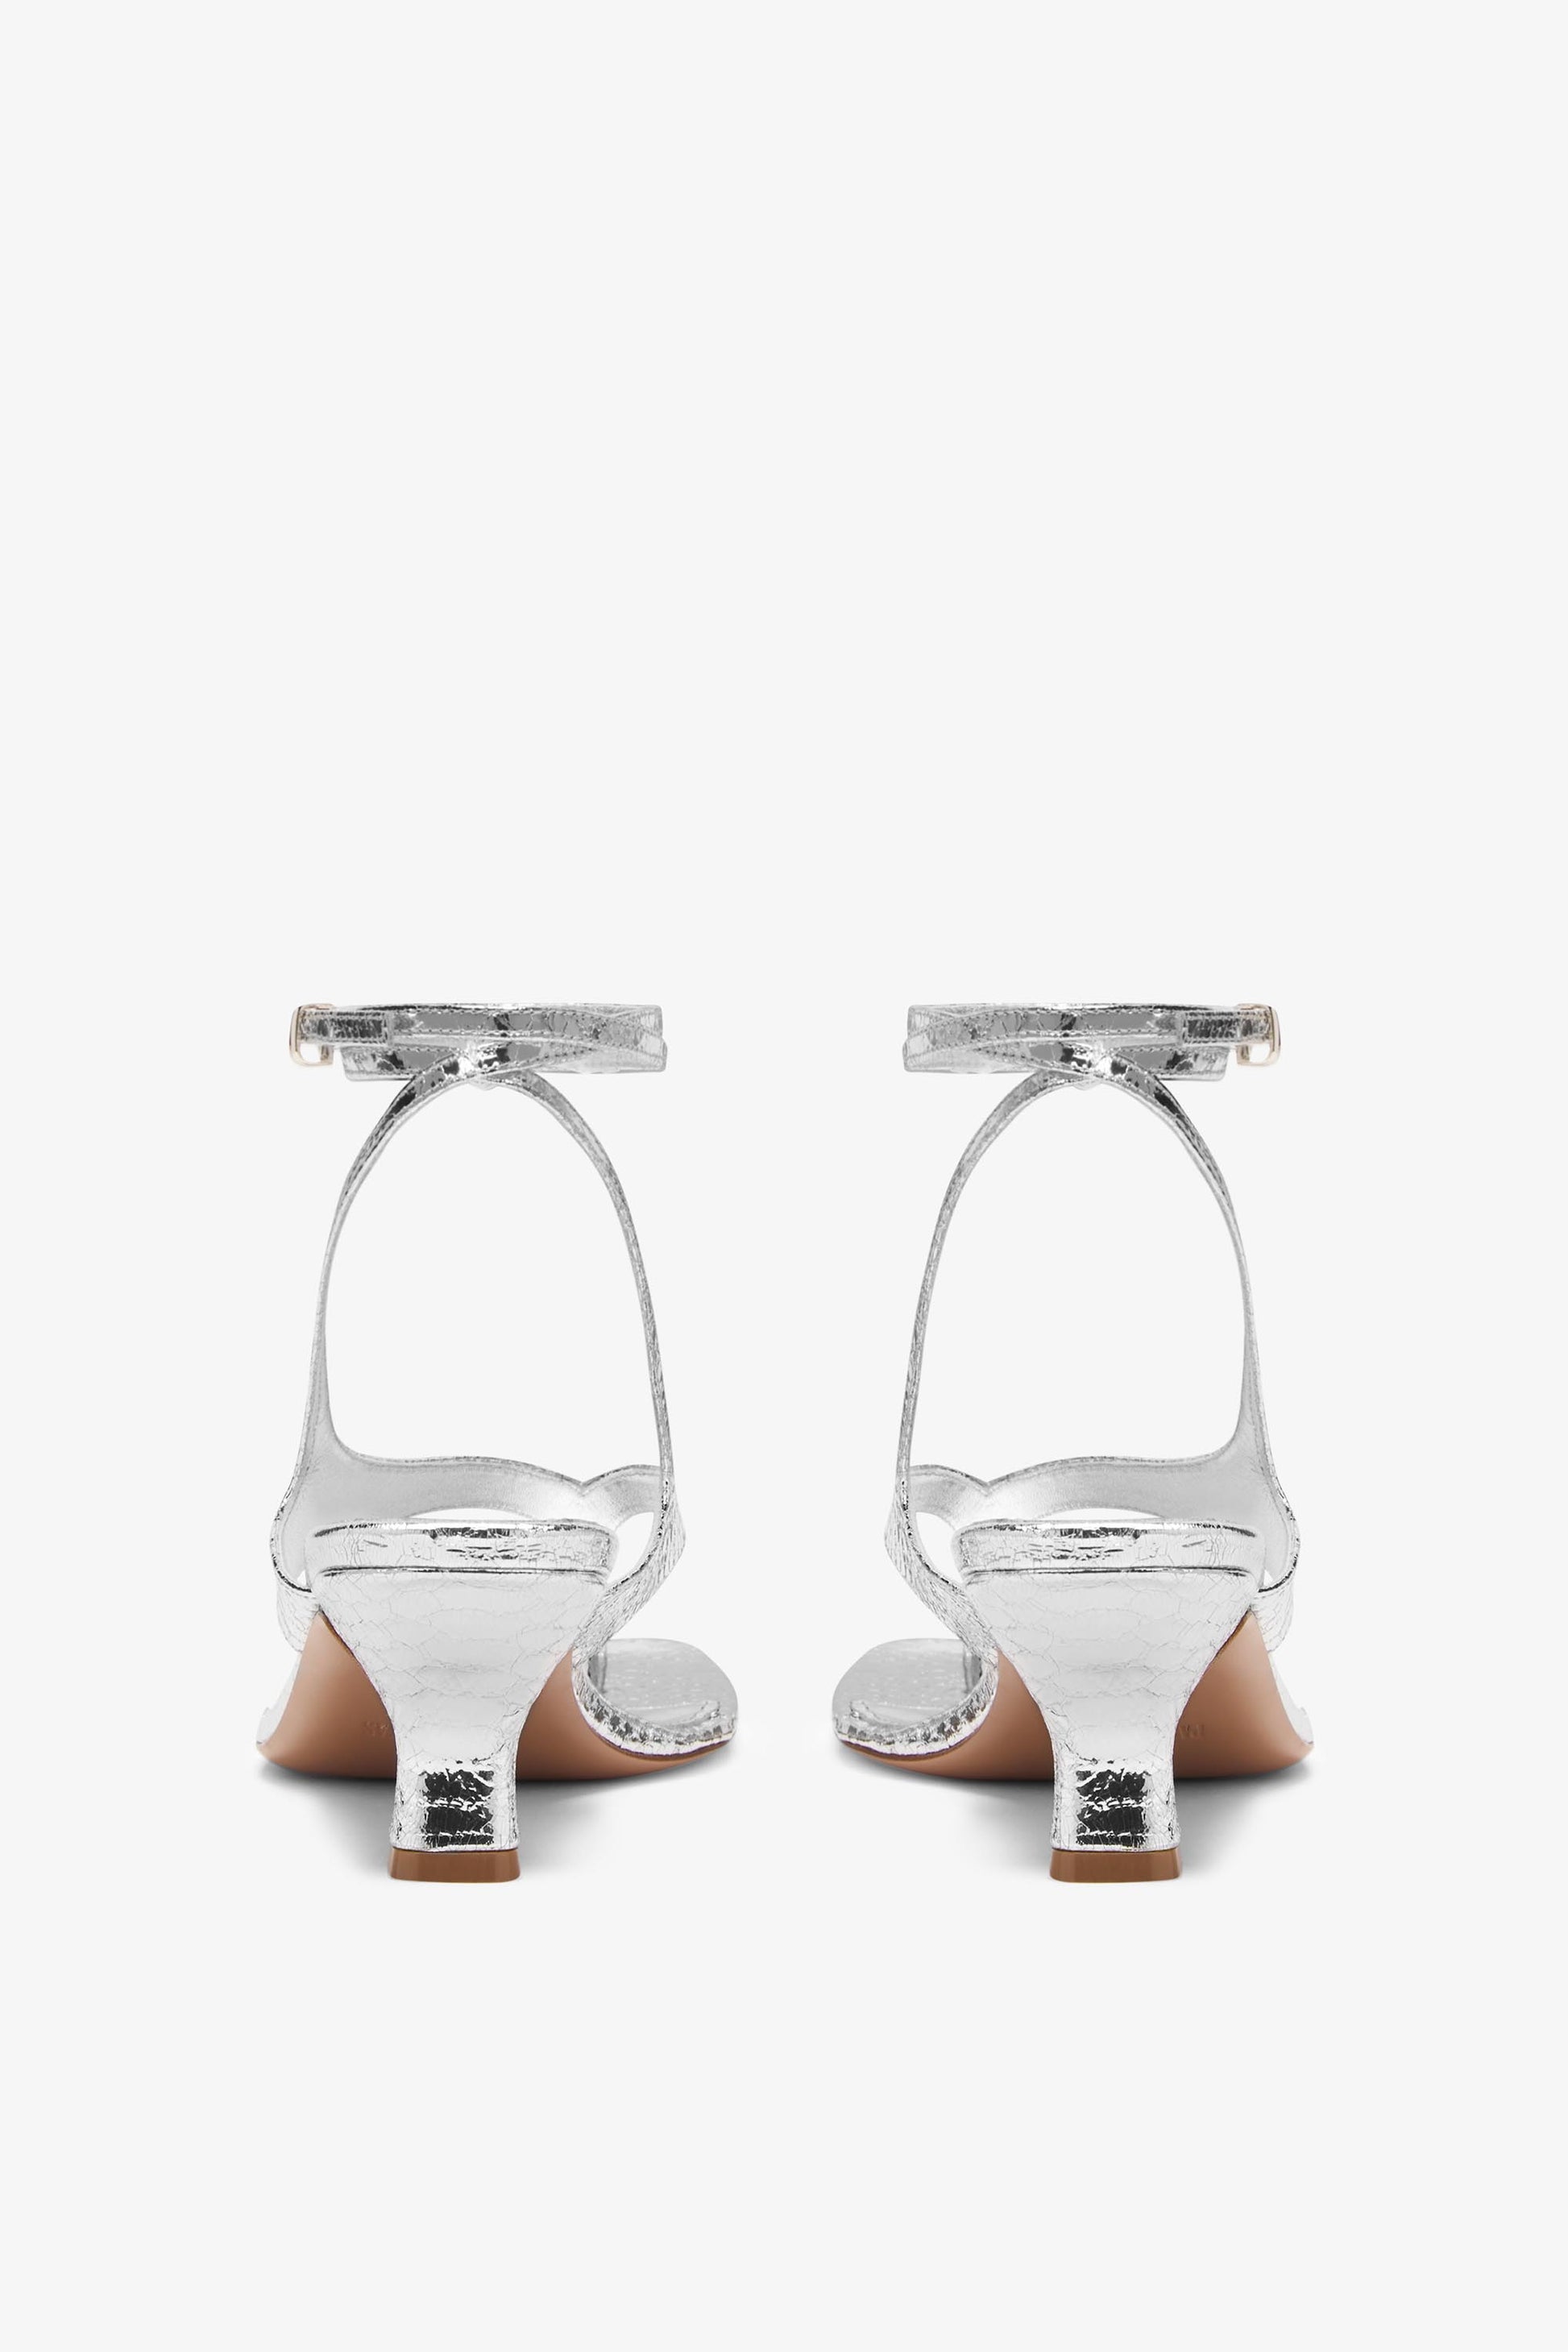 Silver printed leather sandal